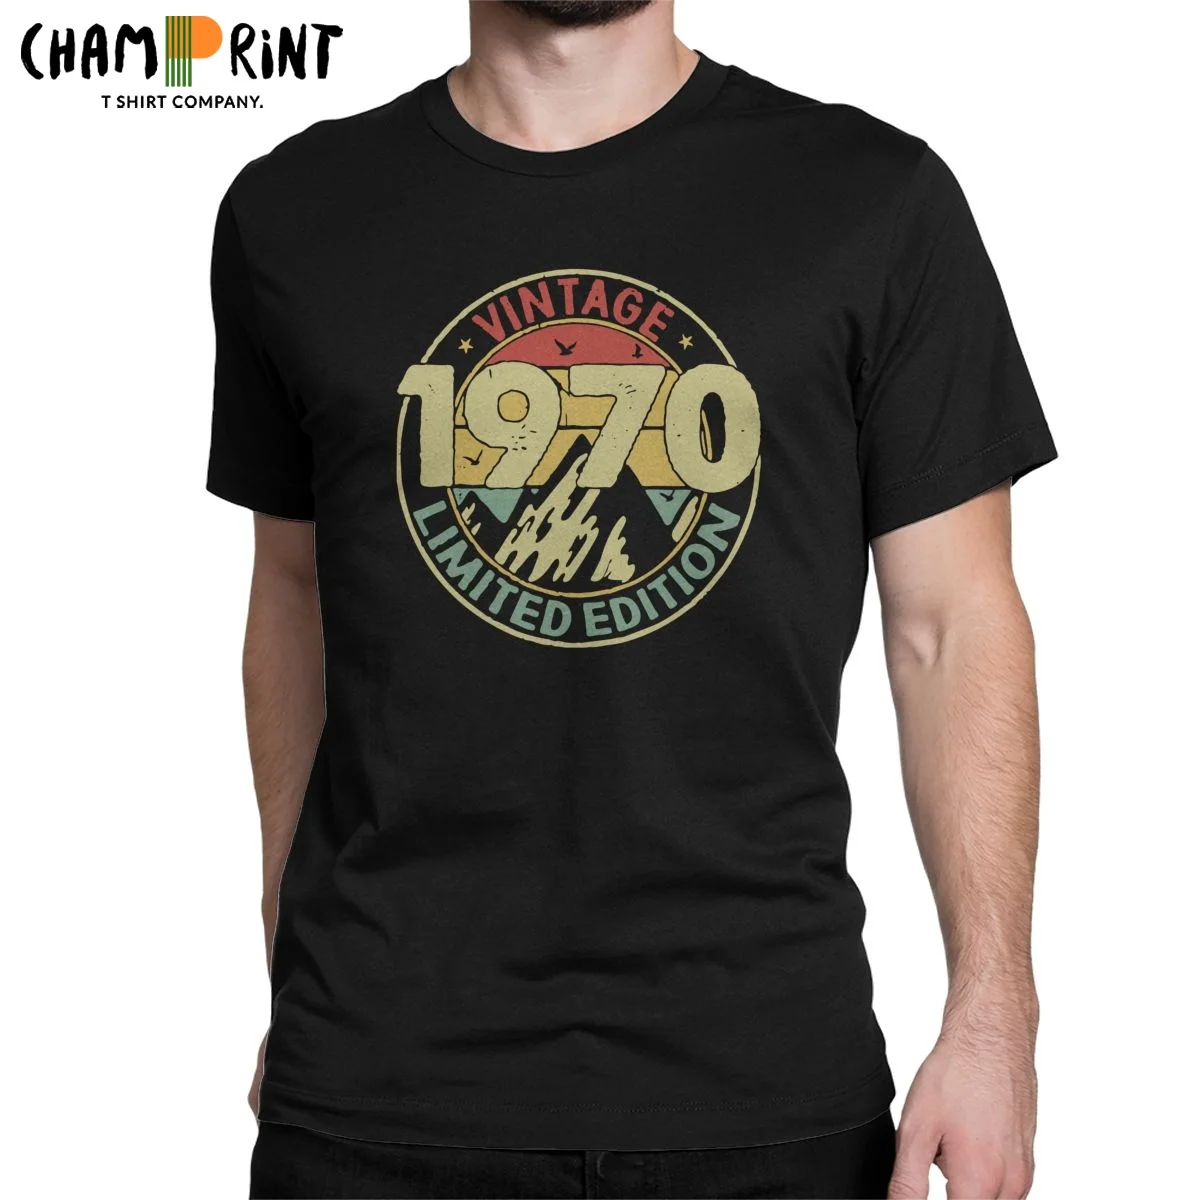 

Vintage 1970 Limited Edition T Shirts Men Cotton Funny T-Shirt Round Neck Born In 1970 Tee Shirt Short Sleeve Clothing Summer